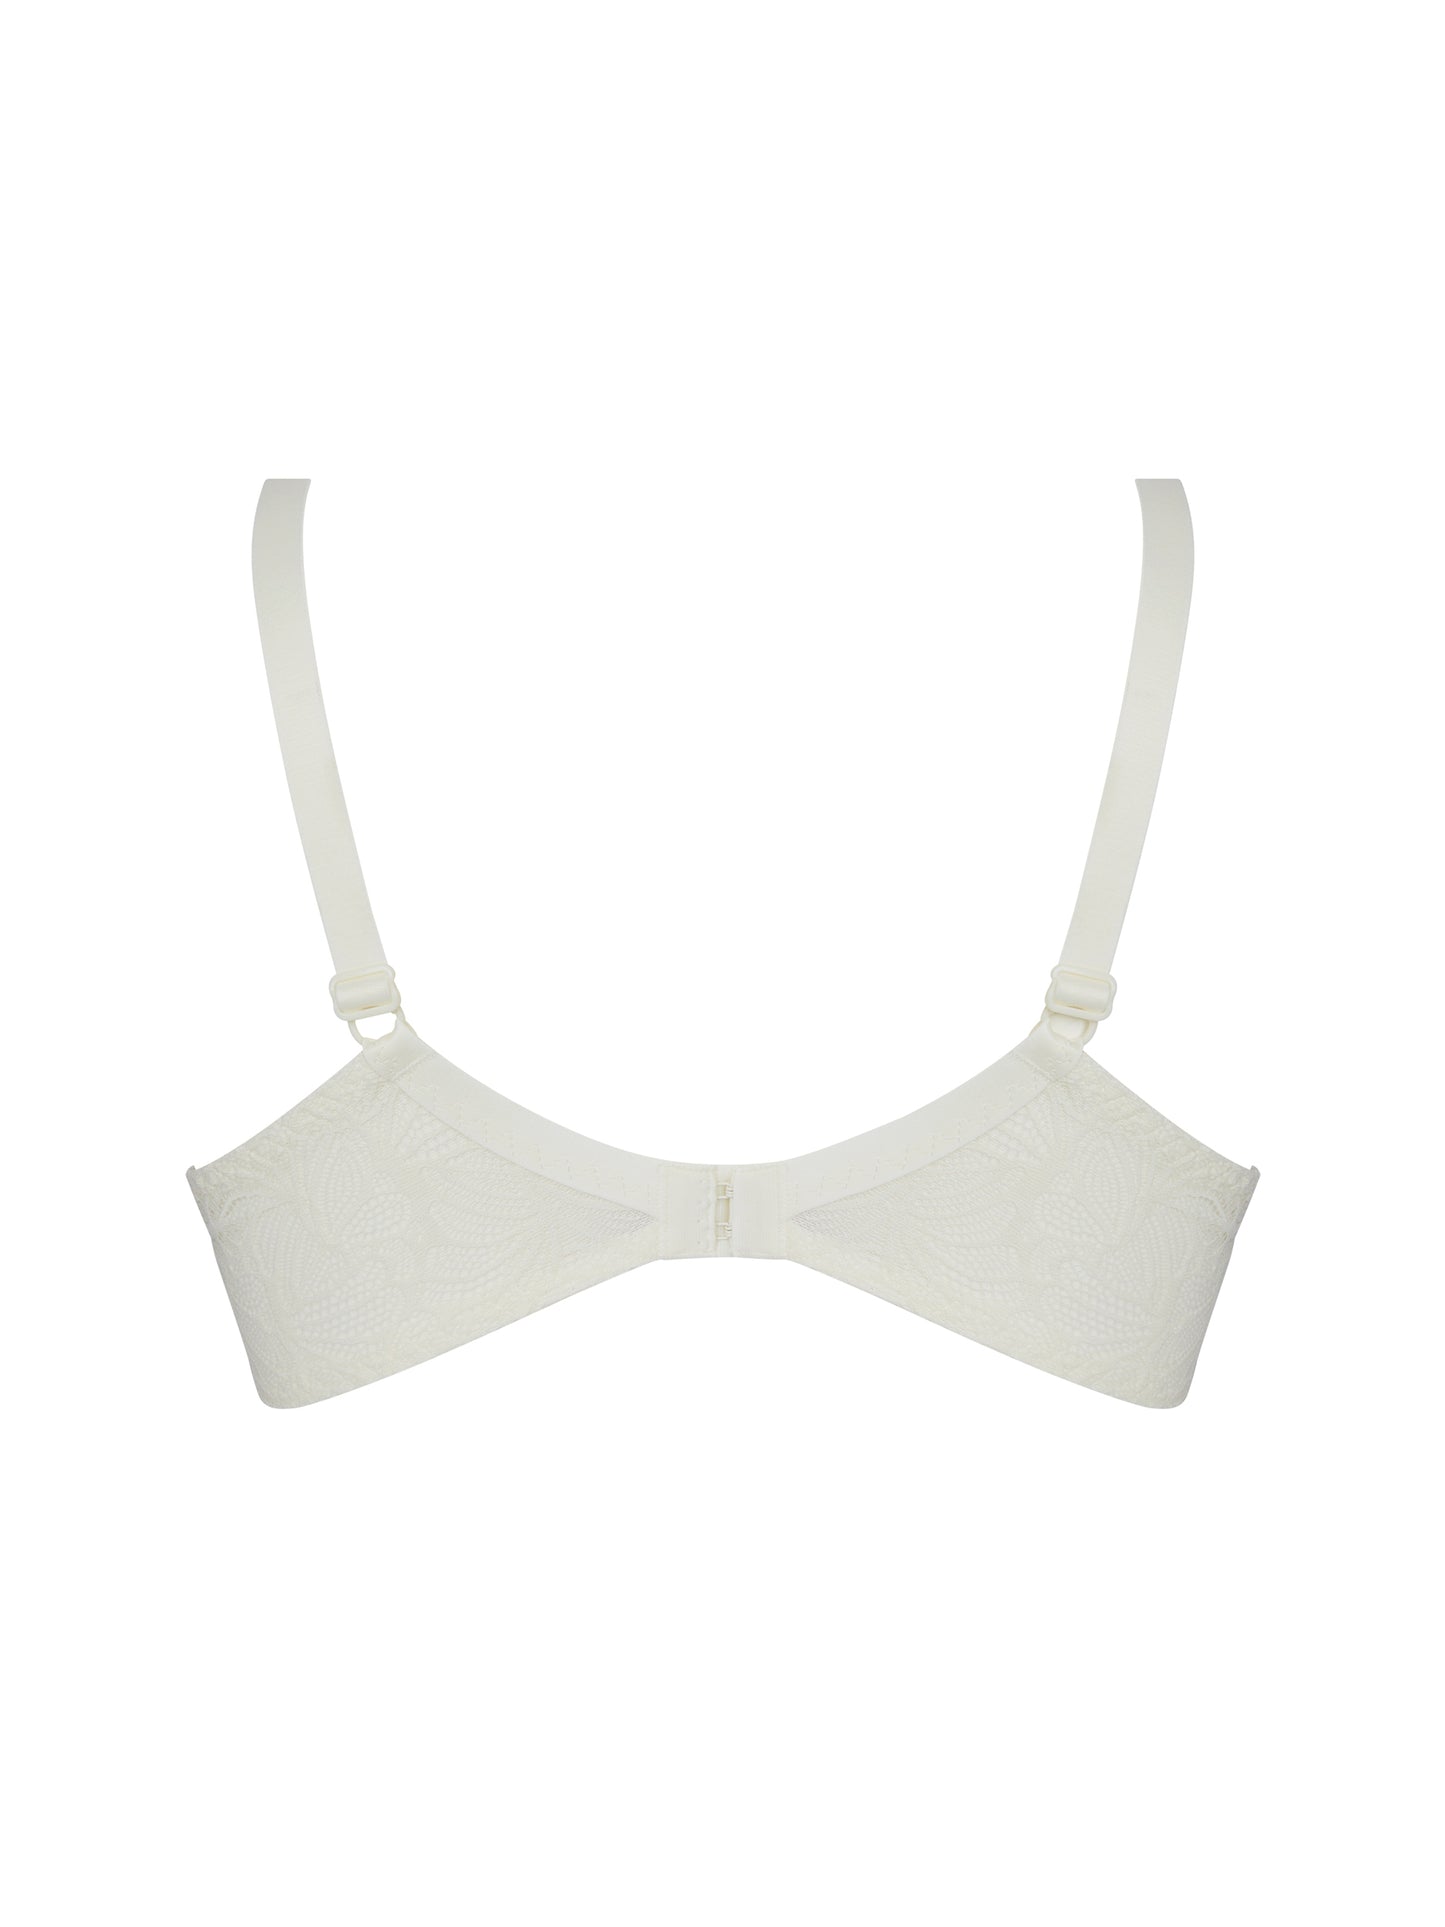 Atelier Séduction 3/4 Cup Bra By Antigel in Ivory - 30-40 C-G (EURO sizes)